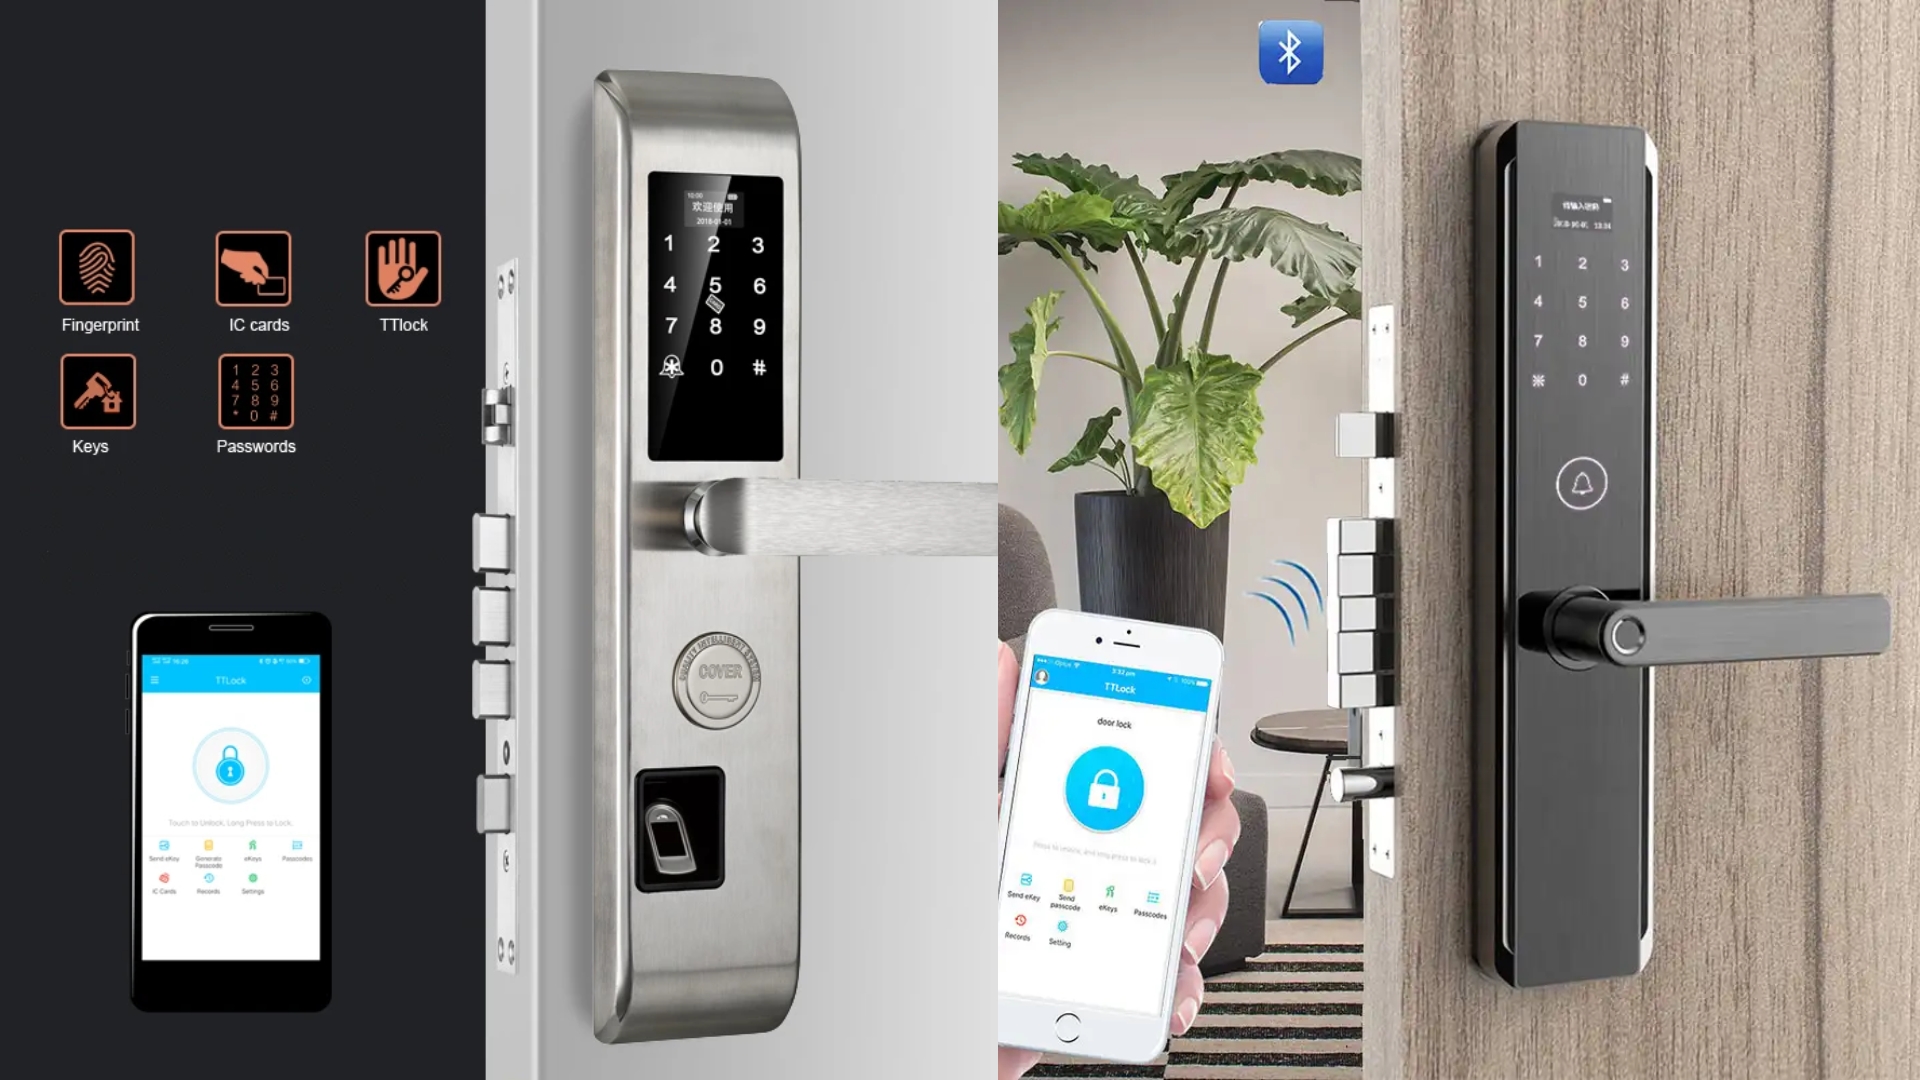 Smart locks prevent home lockouts with features like fingerprint access, smartphone controls, and keypad entries.